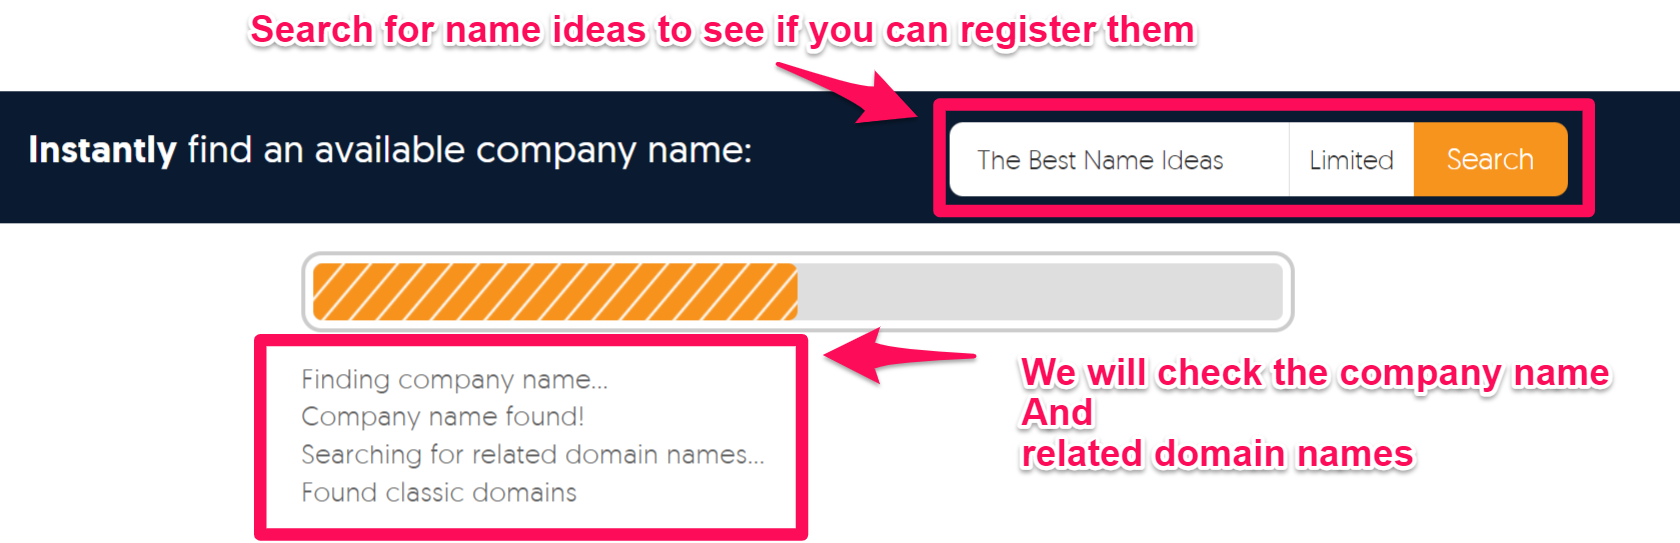 Usin our search tools to check if the "best company name ideas" can be registered as a company.